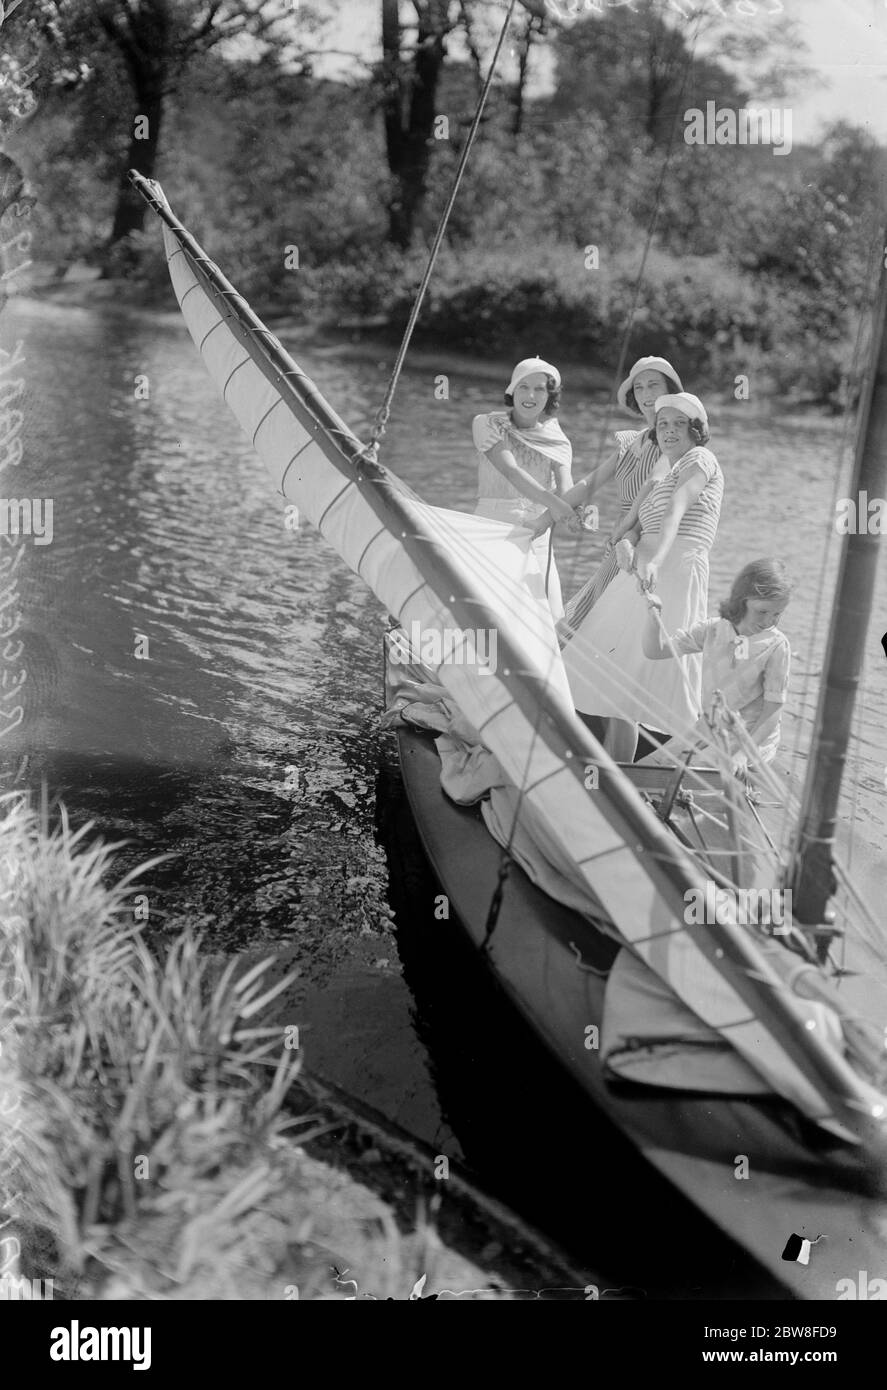 Sailing thrills in the Heart of London . Small sailing yachts have just been installed to add to the pleasures of Londoners on the lake , with its picturesque surroundings , in Regents Park . 18 August 1932 Stock Photo